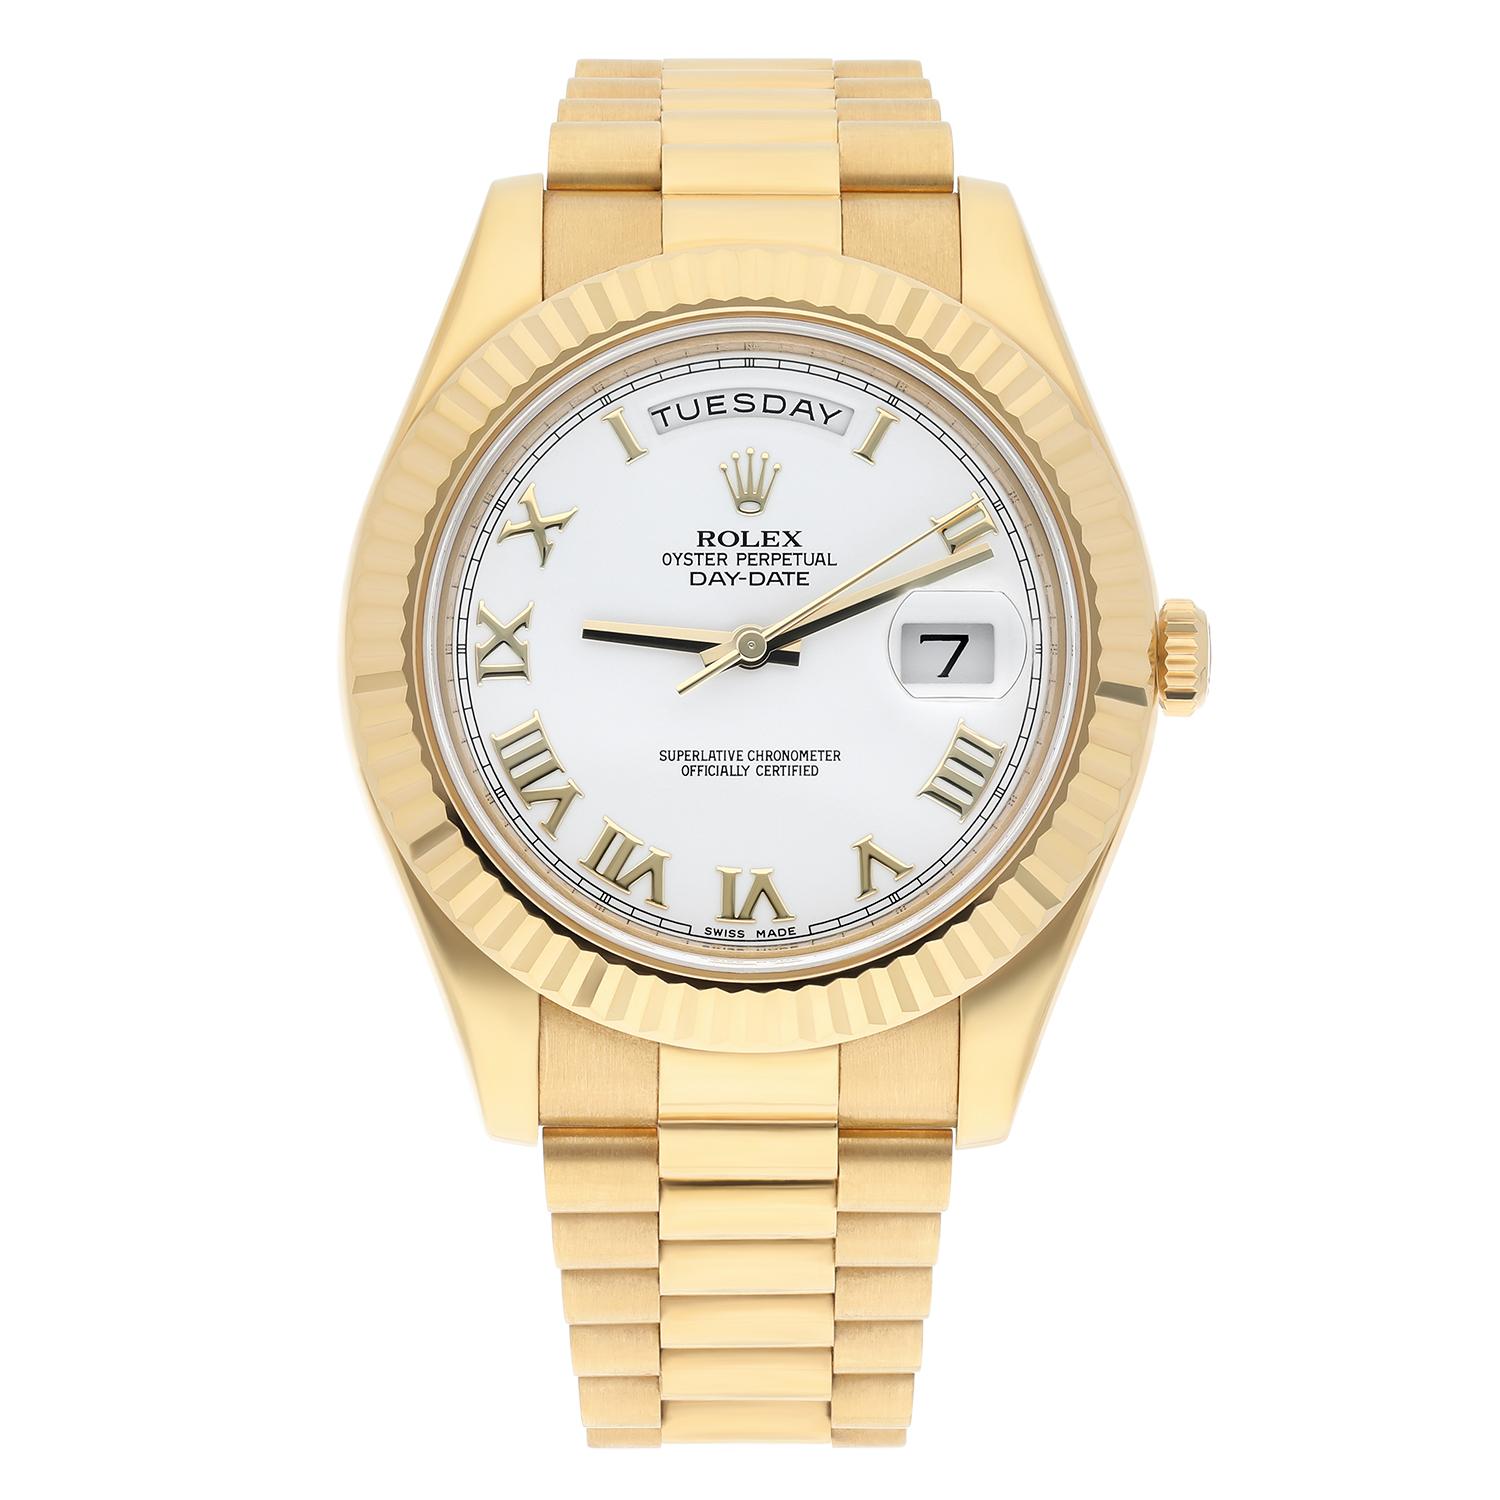 Elevate your style with this luxurious Rolex Day-Date II 218238 wristwatch. The yellow gold case and band exude opulence and sophistication, while the white Roman dial with day and date indicators and fluted bezel add to its classic appeal. Indulge